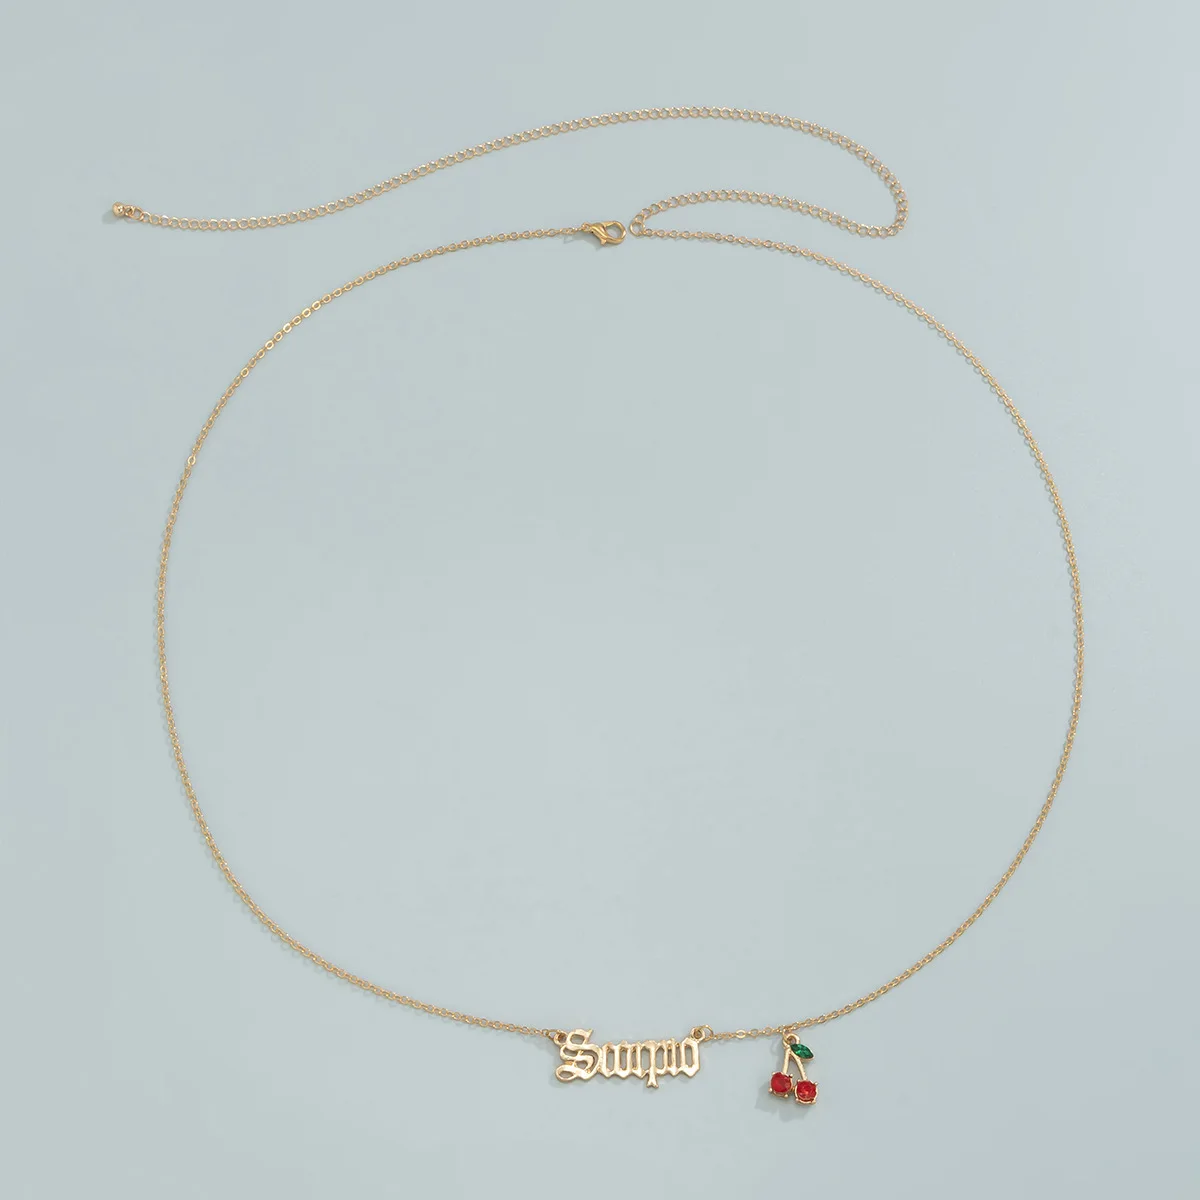 
WC-012 Simple Single Layer Metal Sexy Body Waist Chains Gold Plated Retro English Letter Cherry Pendant Belly Waist Chain 